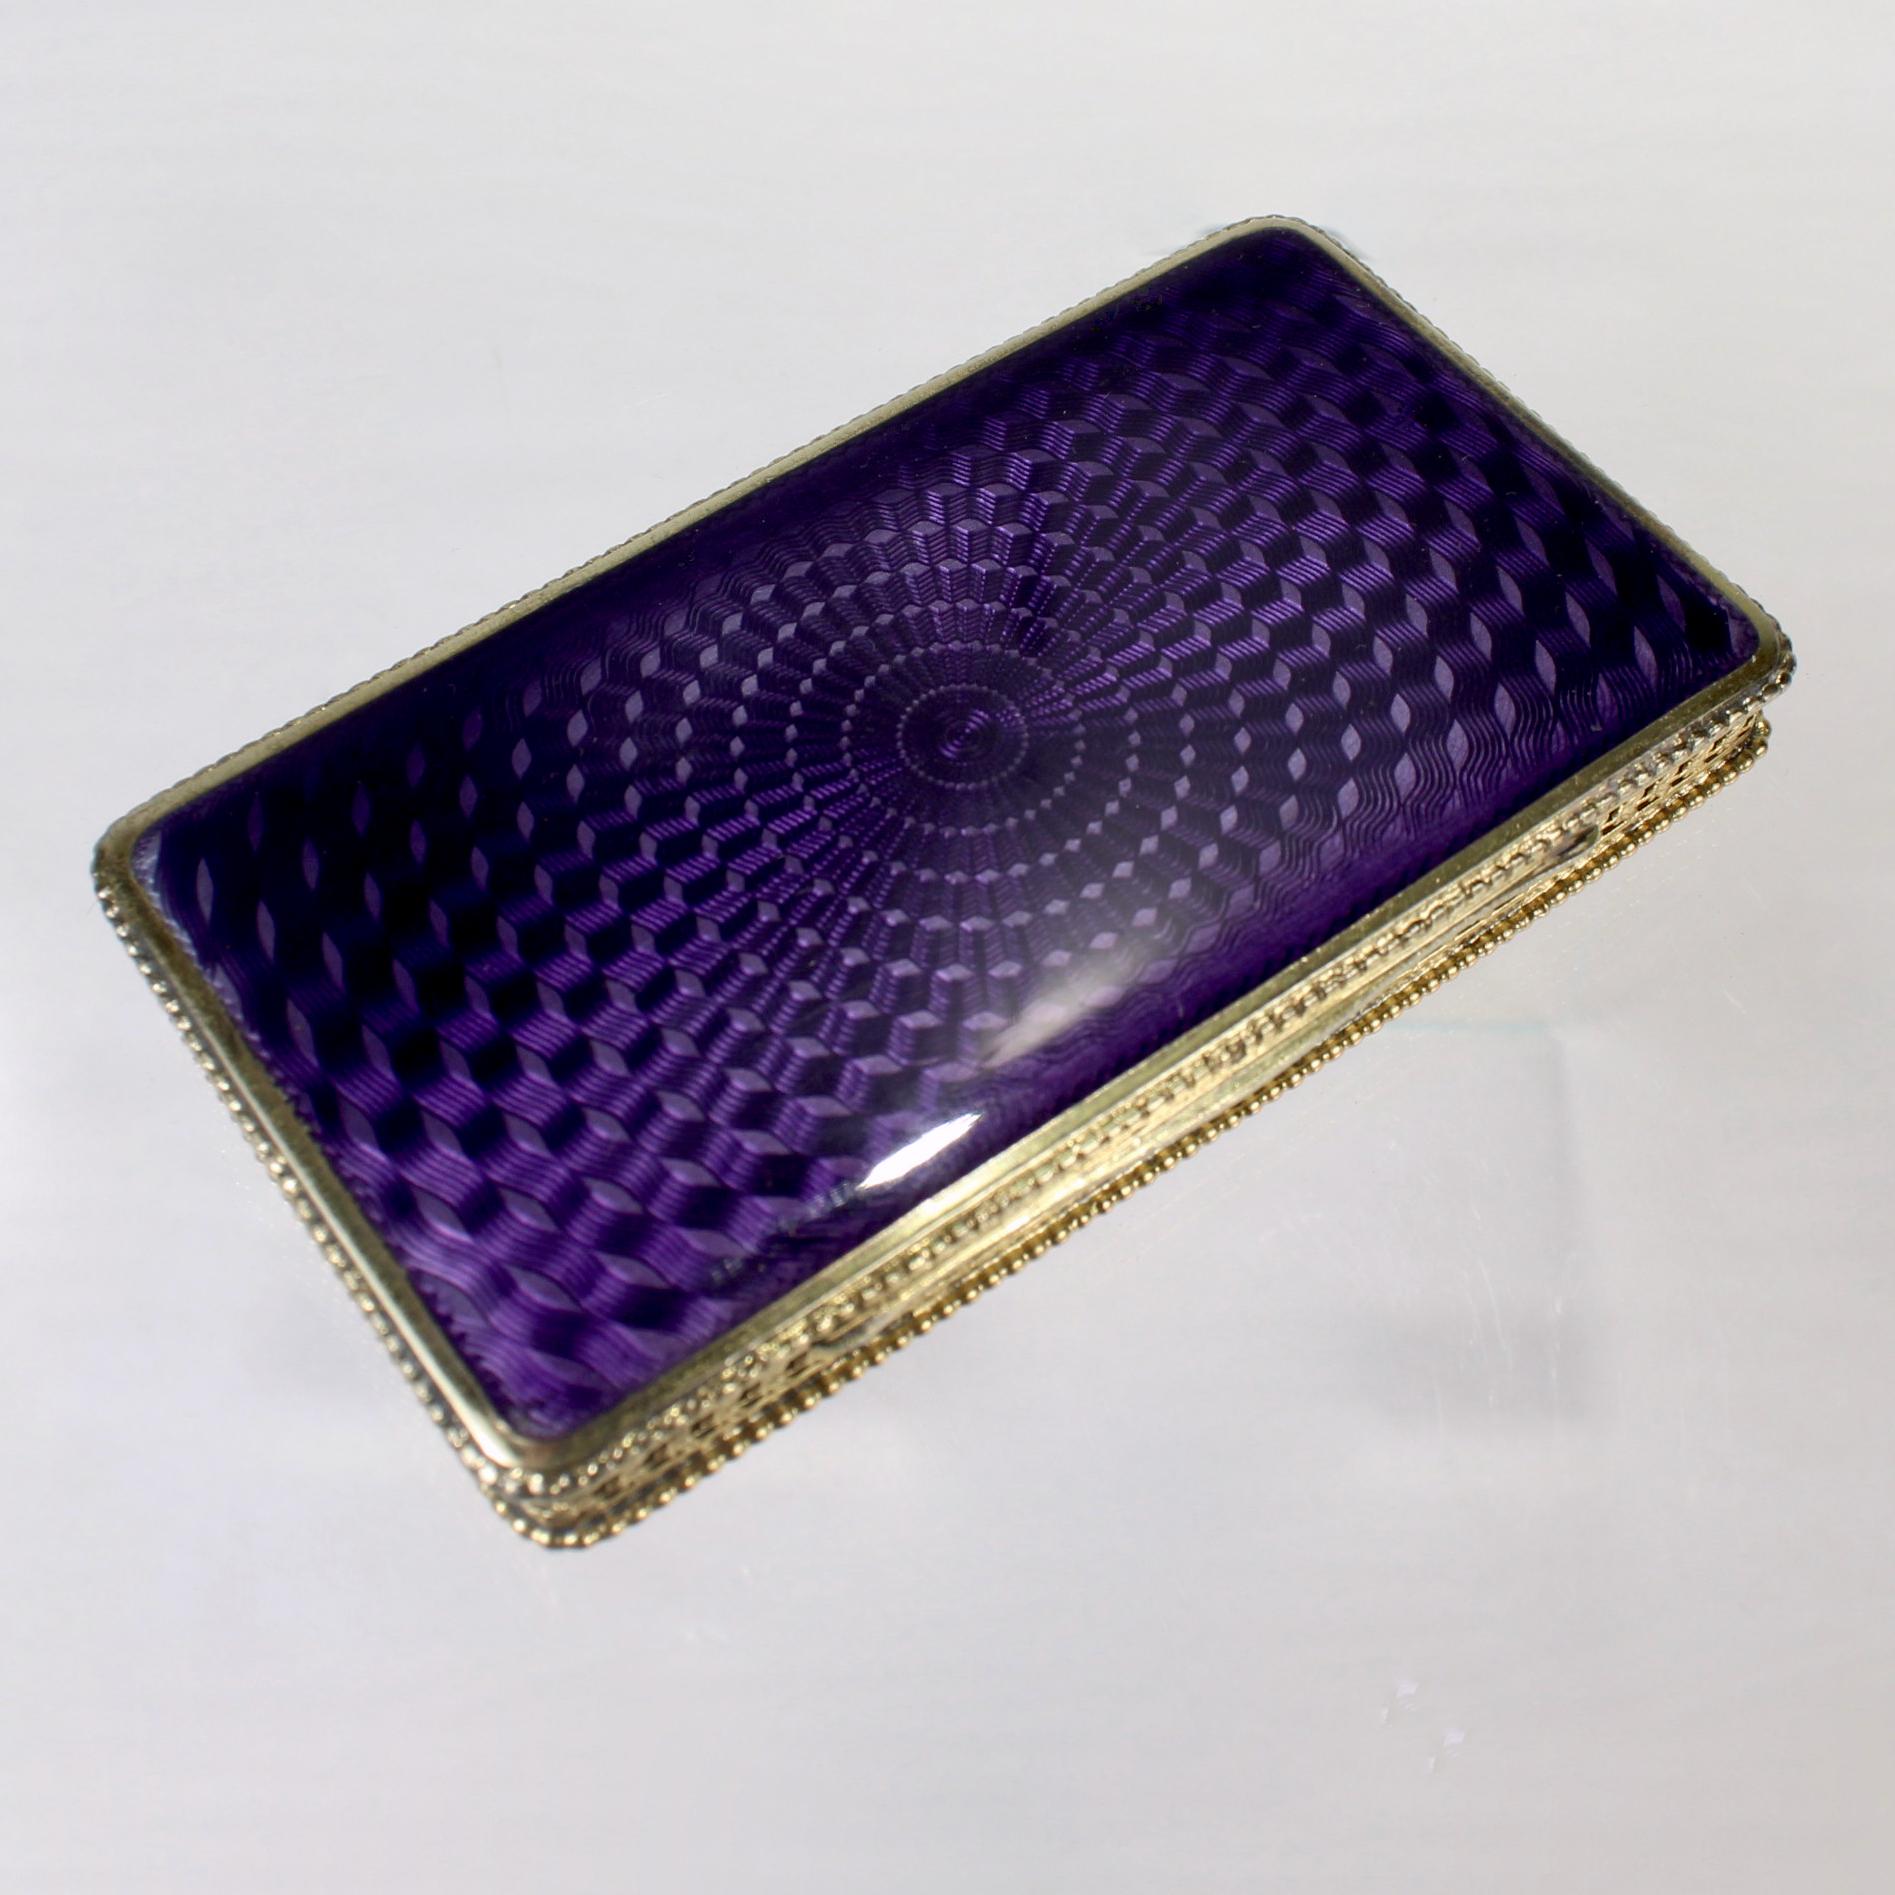 A fine, antique Austrian coin silver compact or covered box.

In gilt 900 fine silver.

Decorated with purple guilloche enamel to both top and bottom.

Together with its original leather with case. 

Simply a lovely little box!

Date:
Late 19th or